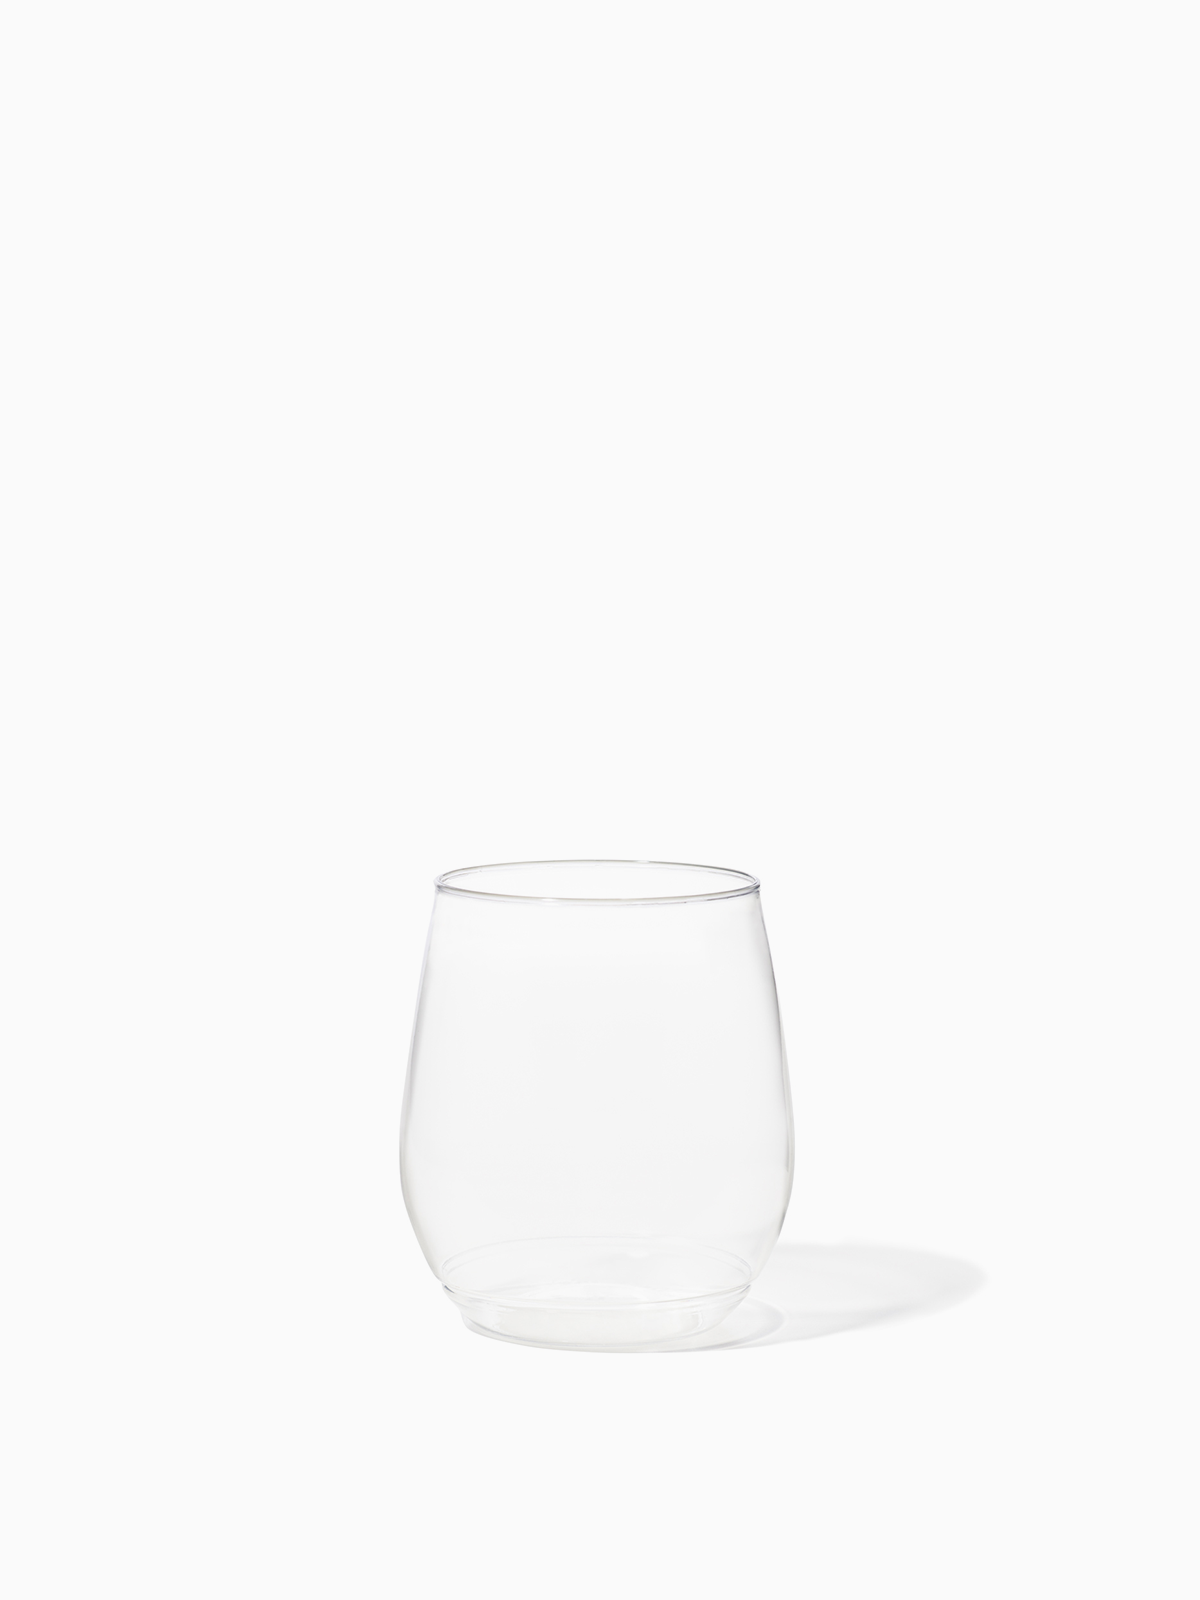 Reusable cups for wine  Cup Concept plastic wine glasses - Cup Concept